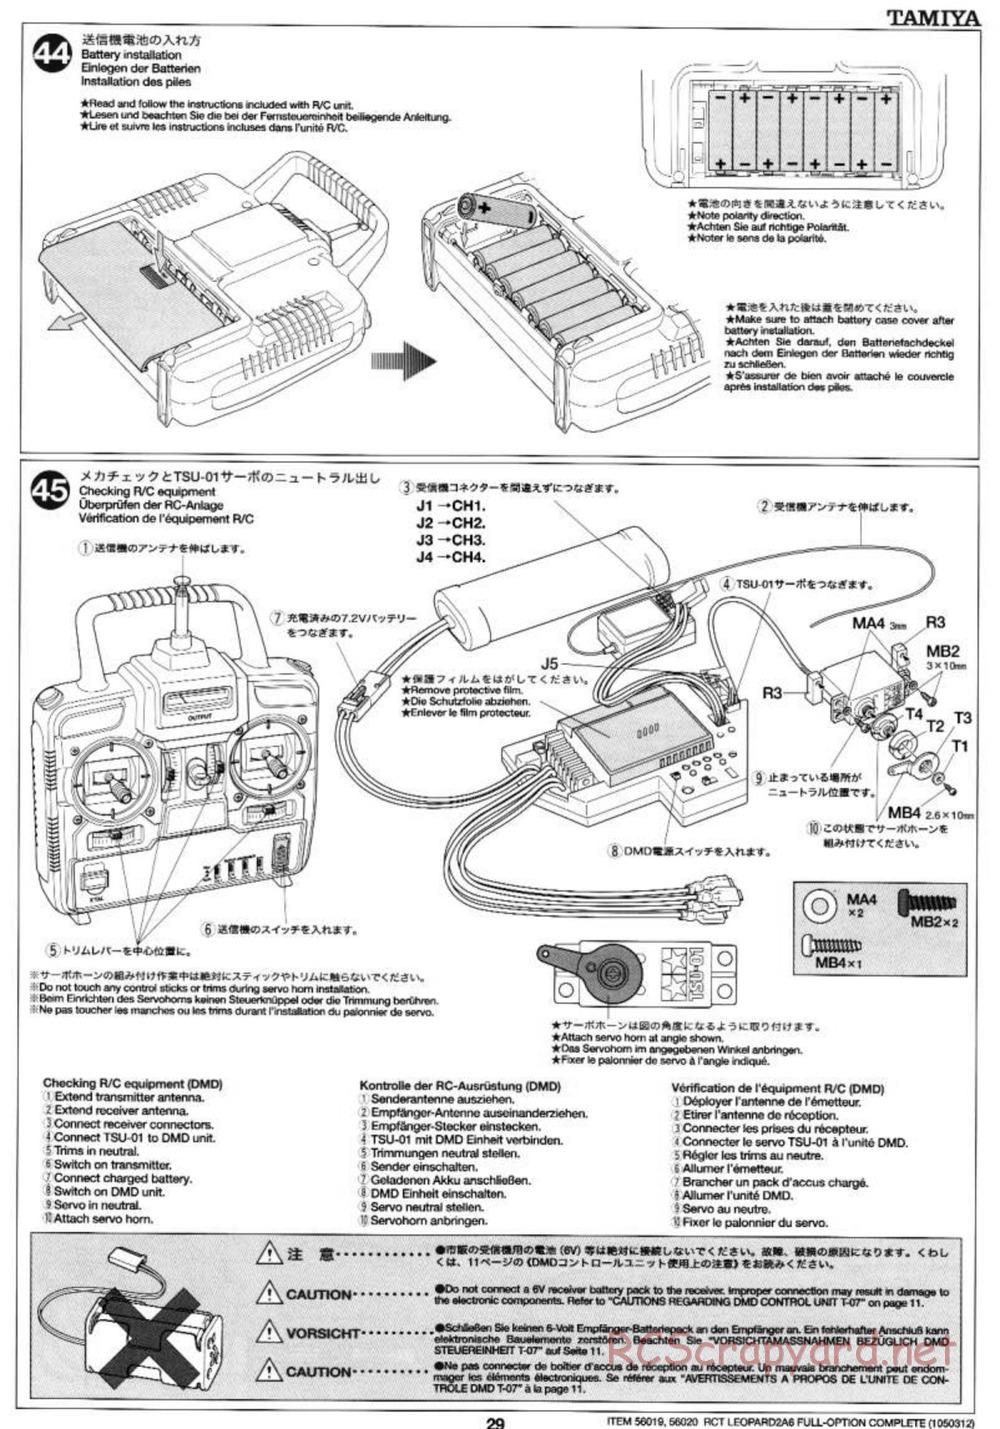 Tamiya - Leopard 2 A6 - 1/16 Scale Chassis - Manual - Page 29